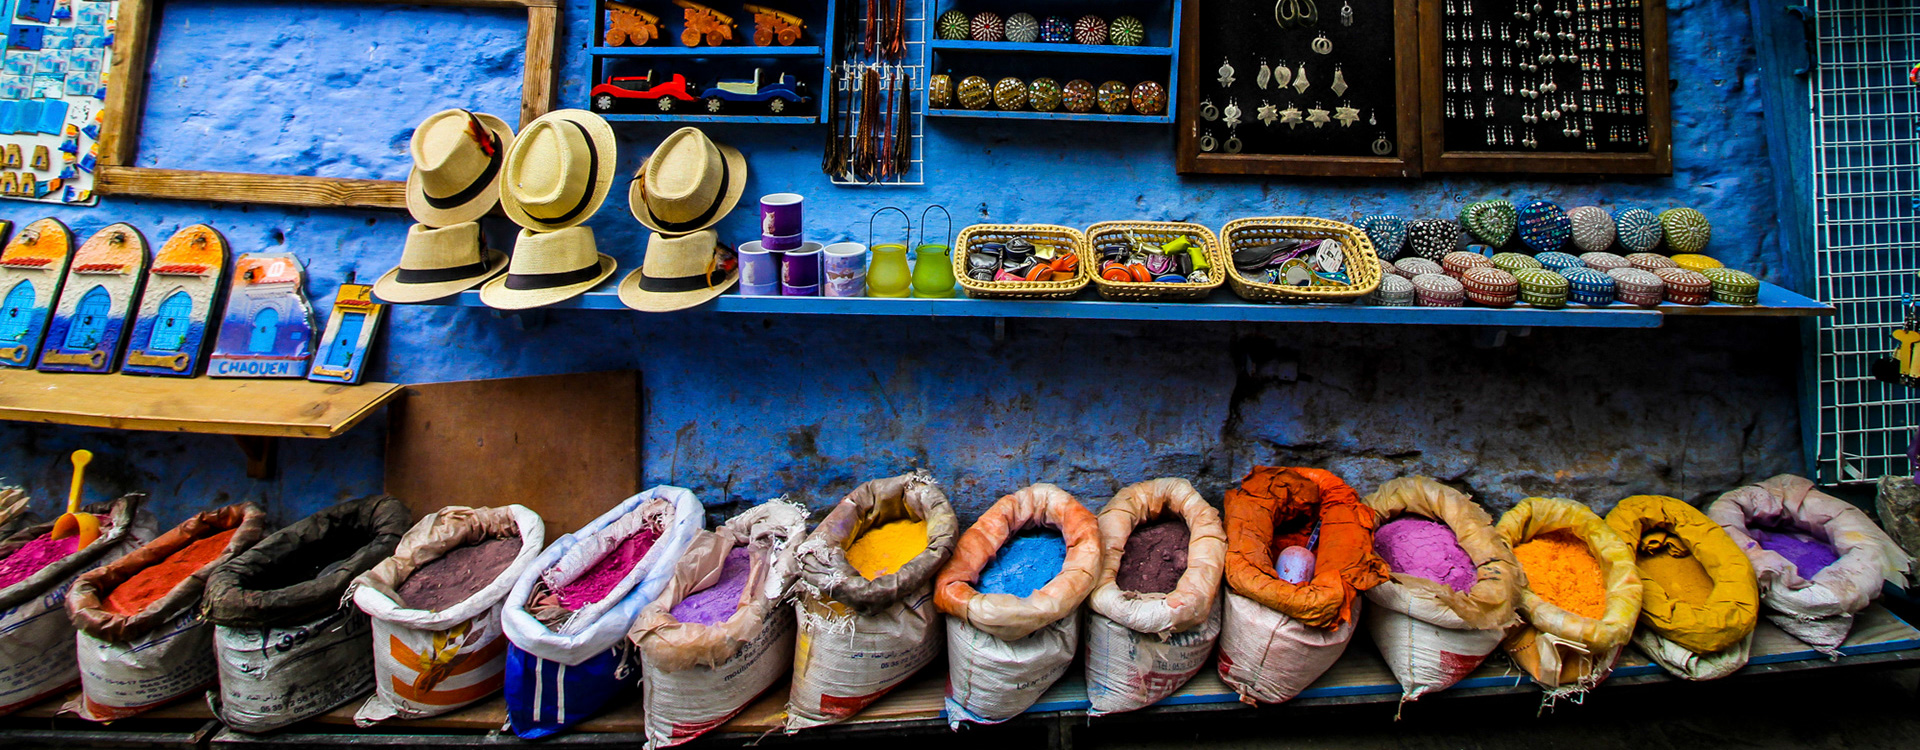 The Marketplace in Chefchaouen, Morocco